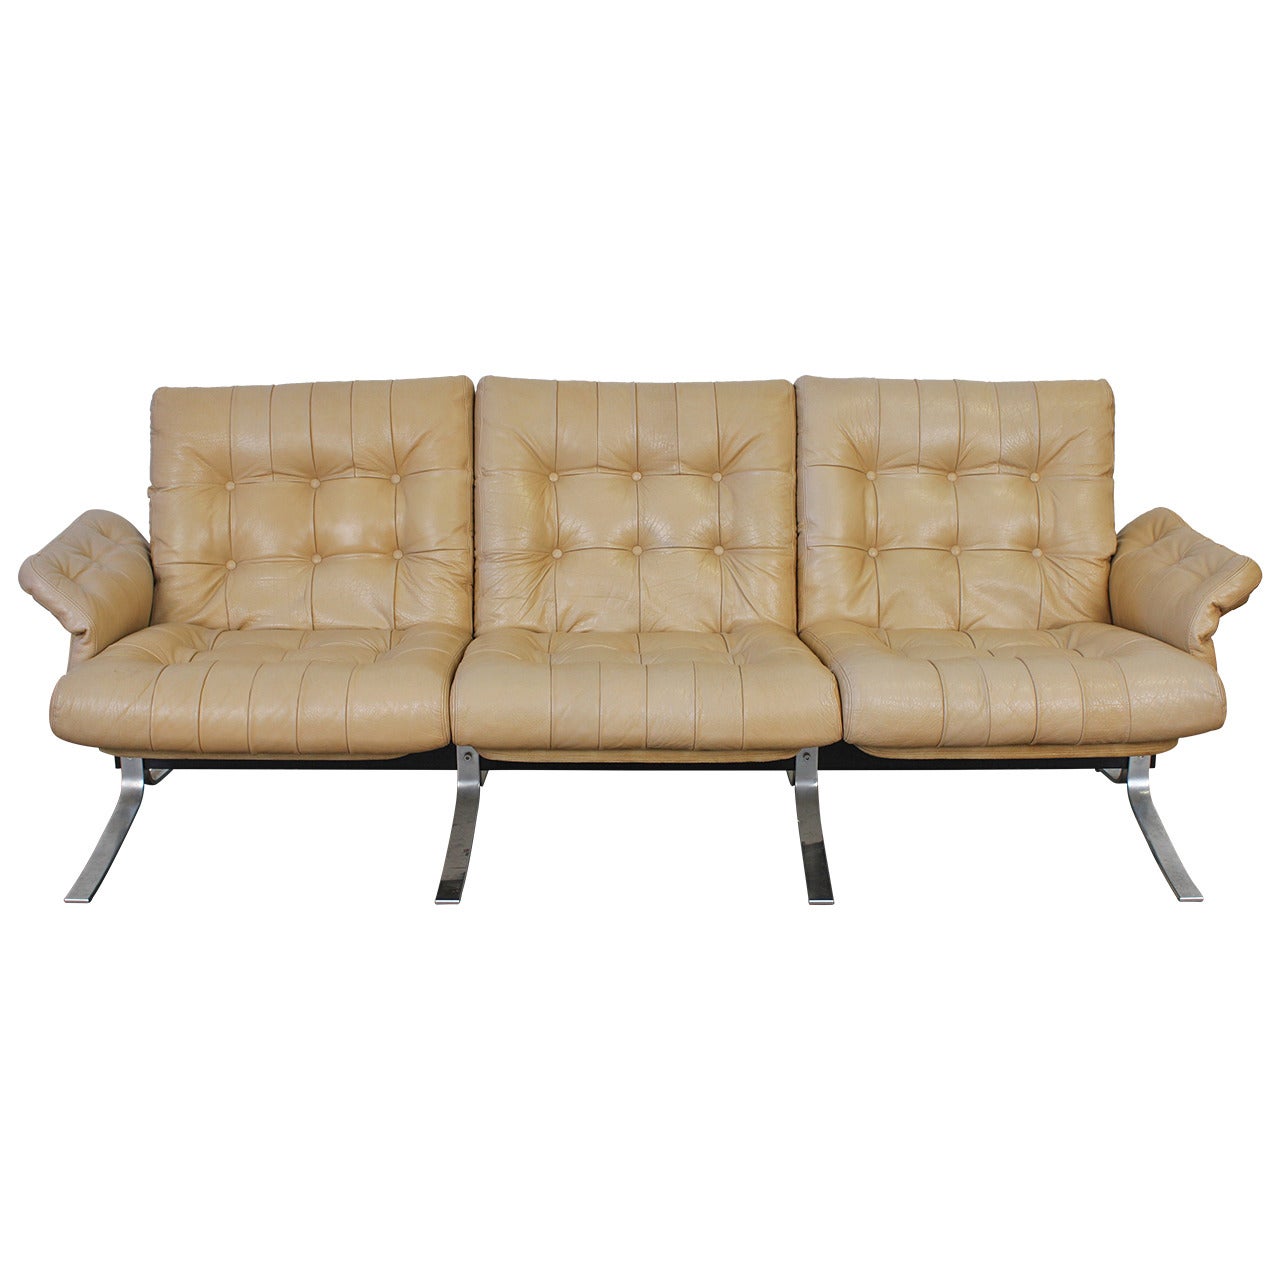 Three-Seat Metal Sofa with Tufted Crème Leather by Ebbe Gehl & Søren Nissen